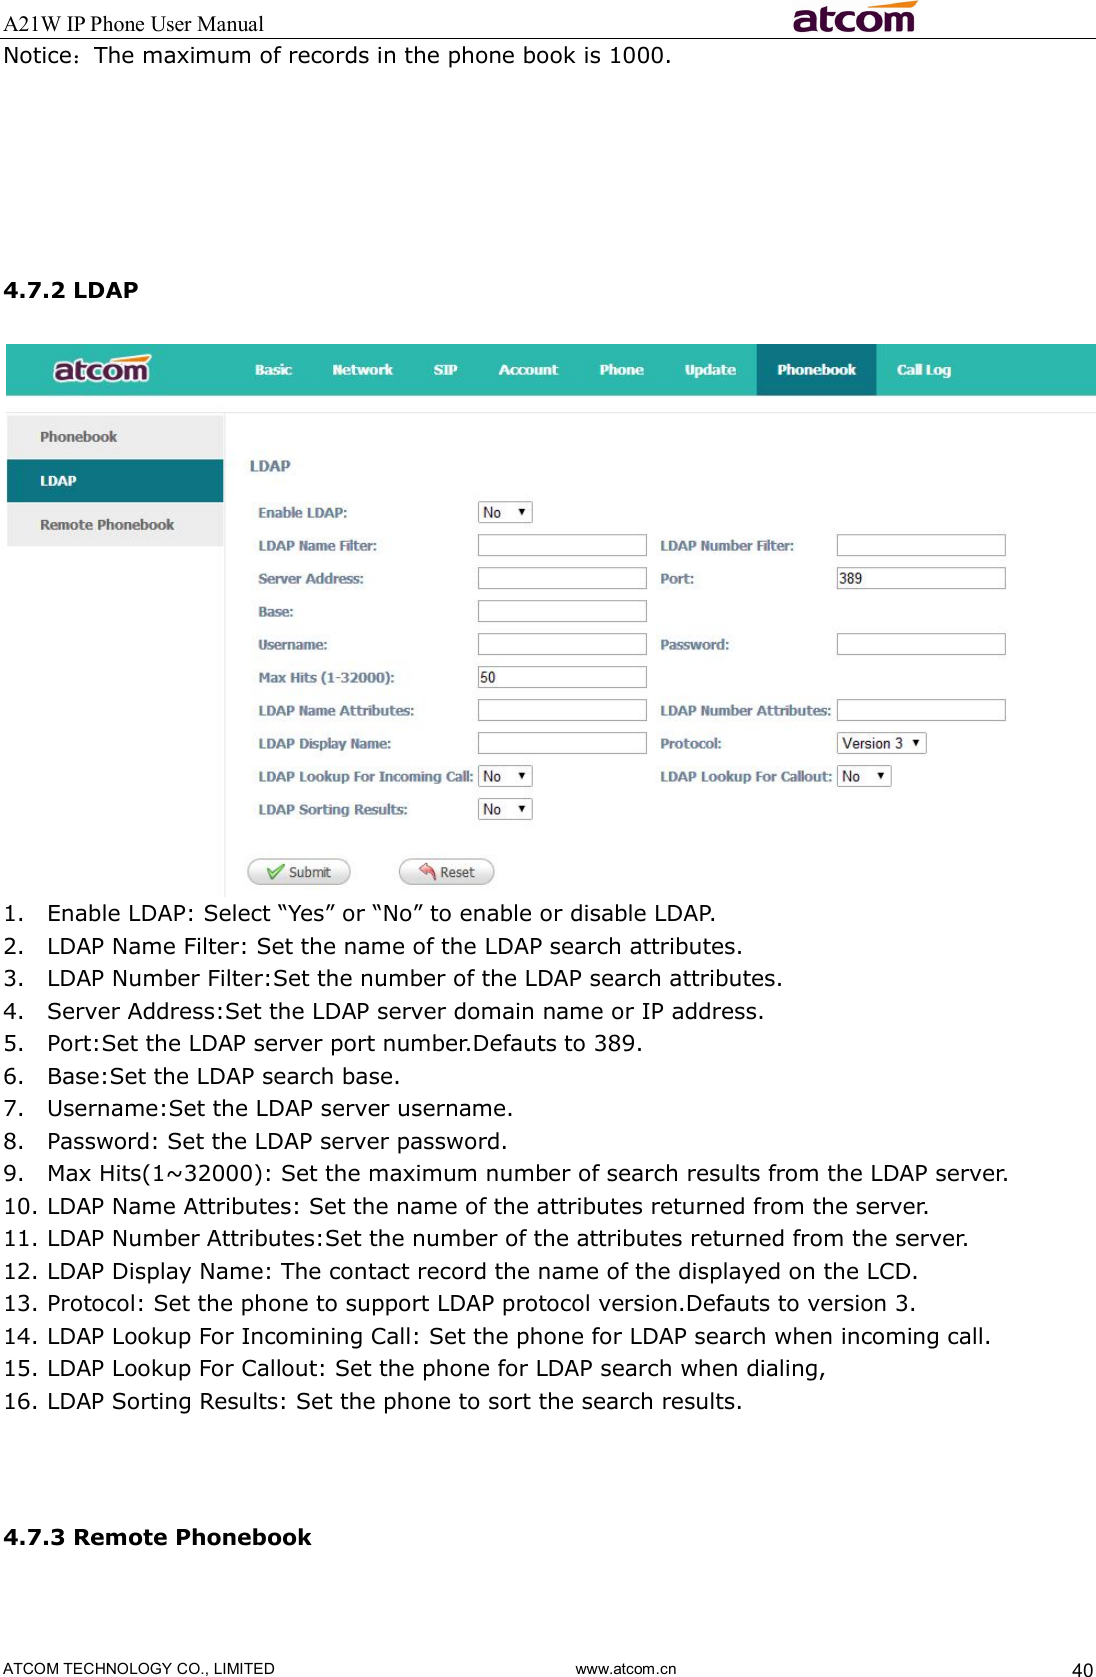 A21W IP Phone User Manual                                                          ATCOM TECHNOLOGY CO., LIMITED                              www.atcom.cn  40 Notice：The maximum of records in the phone book is 1000.      4.7.2 LDAP  1. Enable LDAP: Select “Yes” or “No” to enable or disable LDAP. 2. LDAP Name Filter: Set the name of the LDAP search attributes. 3. LDAP Number Filter:Set the number of the LDAP search attributes. 4. Server Address:Set the LDAP server domain name or IP address. 5. Port:Set the LDAP server port number.Defauts to 389. 6. Base:Set the LDAP search base. 7. Username:Set the LDAP server username. 8. Password: Set the LDAP server password. 9. Max Hits(1~32000): Set the maximum number of search results from the LDAP server. 10. LDAP Name Attributes: Set the name of the attributes returned from the server. 11. LDAP Number Attributes:Set the number of the attributes returned from the server. 12. LDAP Display Name: The contact record the name of the displayed on the LCD.  13. Protocol: Set the phone to support LDAP protocol version.Defauts to version 3. 14. LDAP Lookup For Incomining Call: Set the phone for LDAP search when incoming call.   15. LDAP Lookup For Callout: Set the phone for LDAP search when dialing, 16. LDAP Sorting Results: Set the phone to sort the search results.   4.7.3 Remote Phonebook  